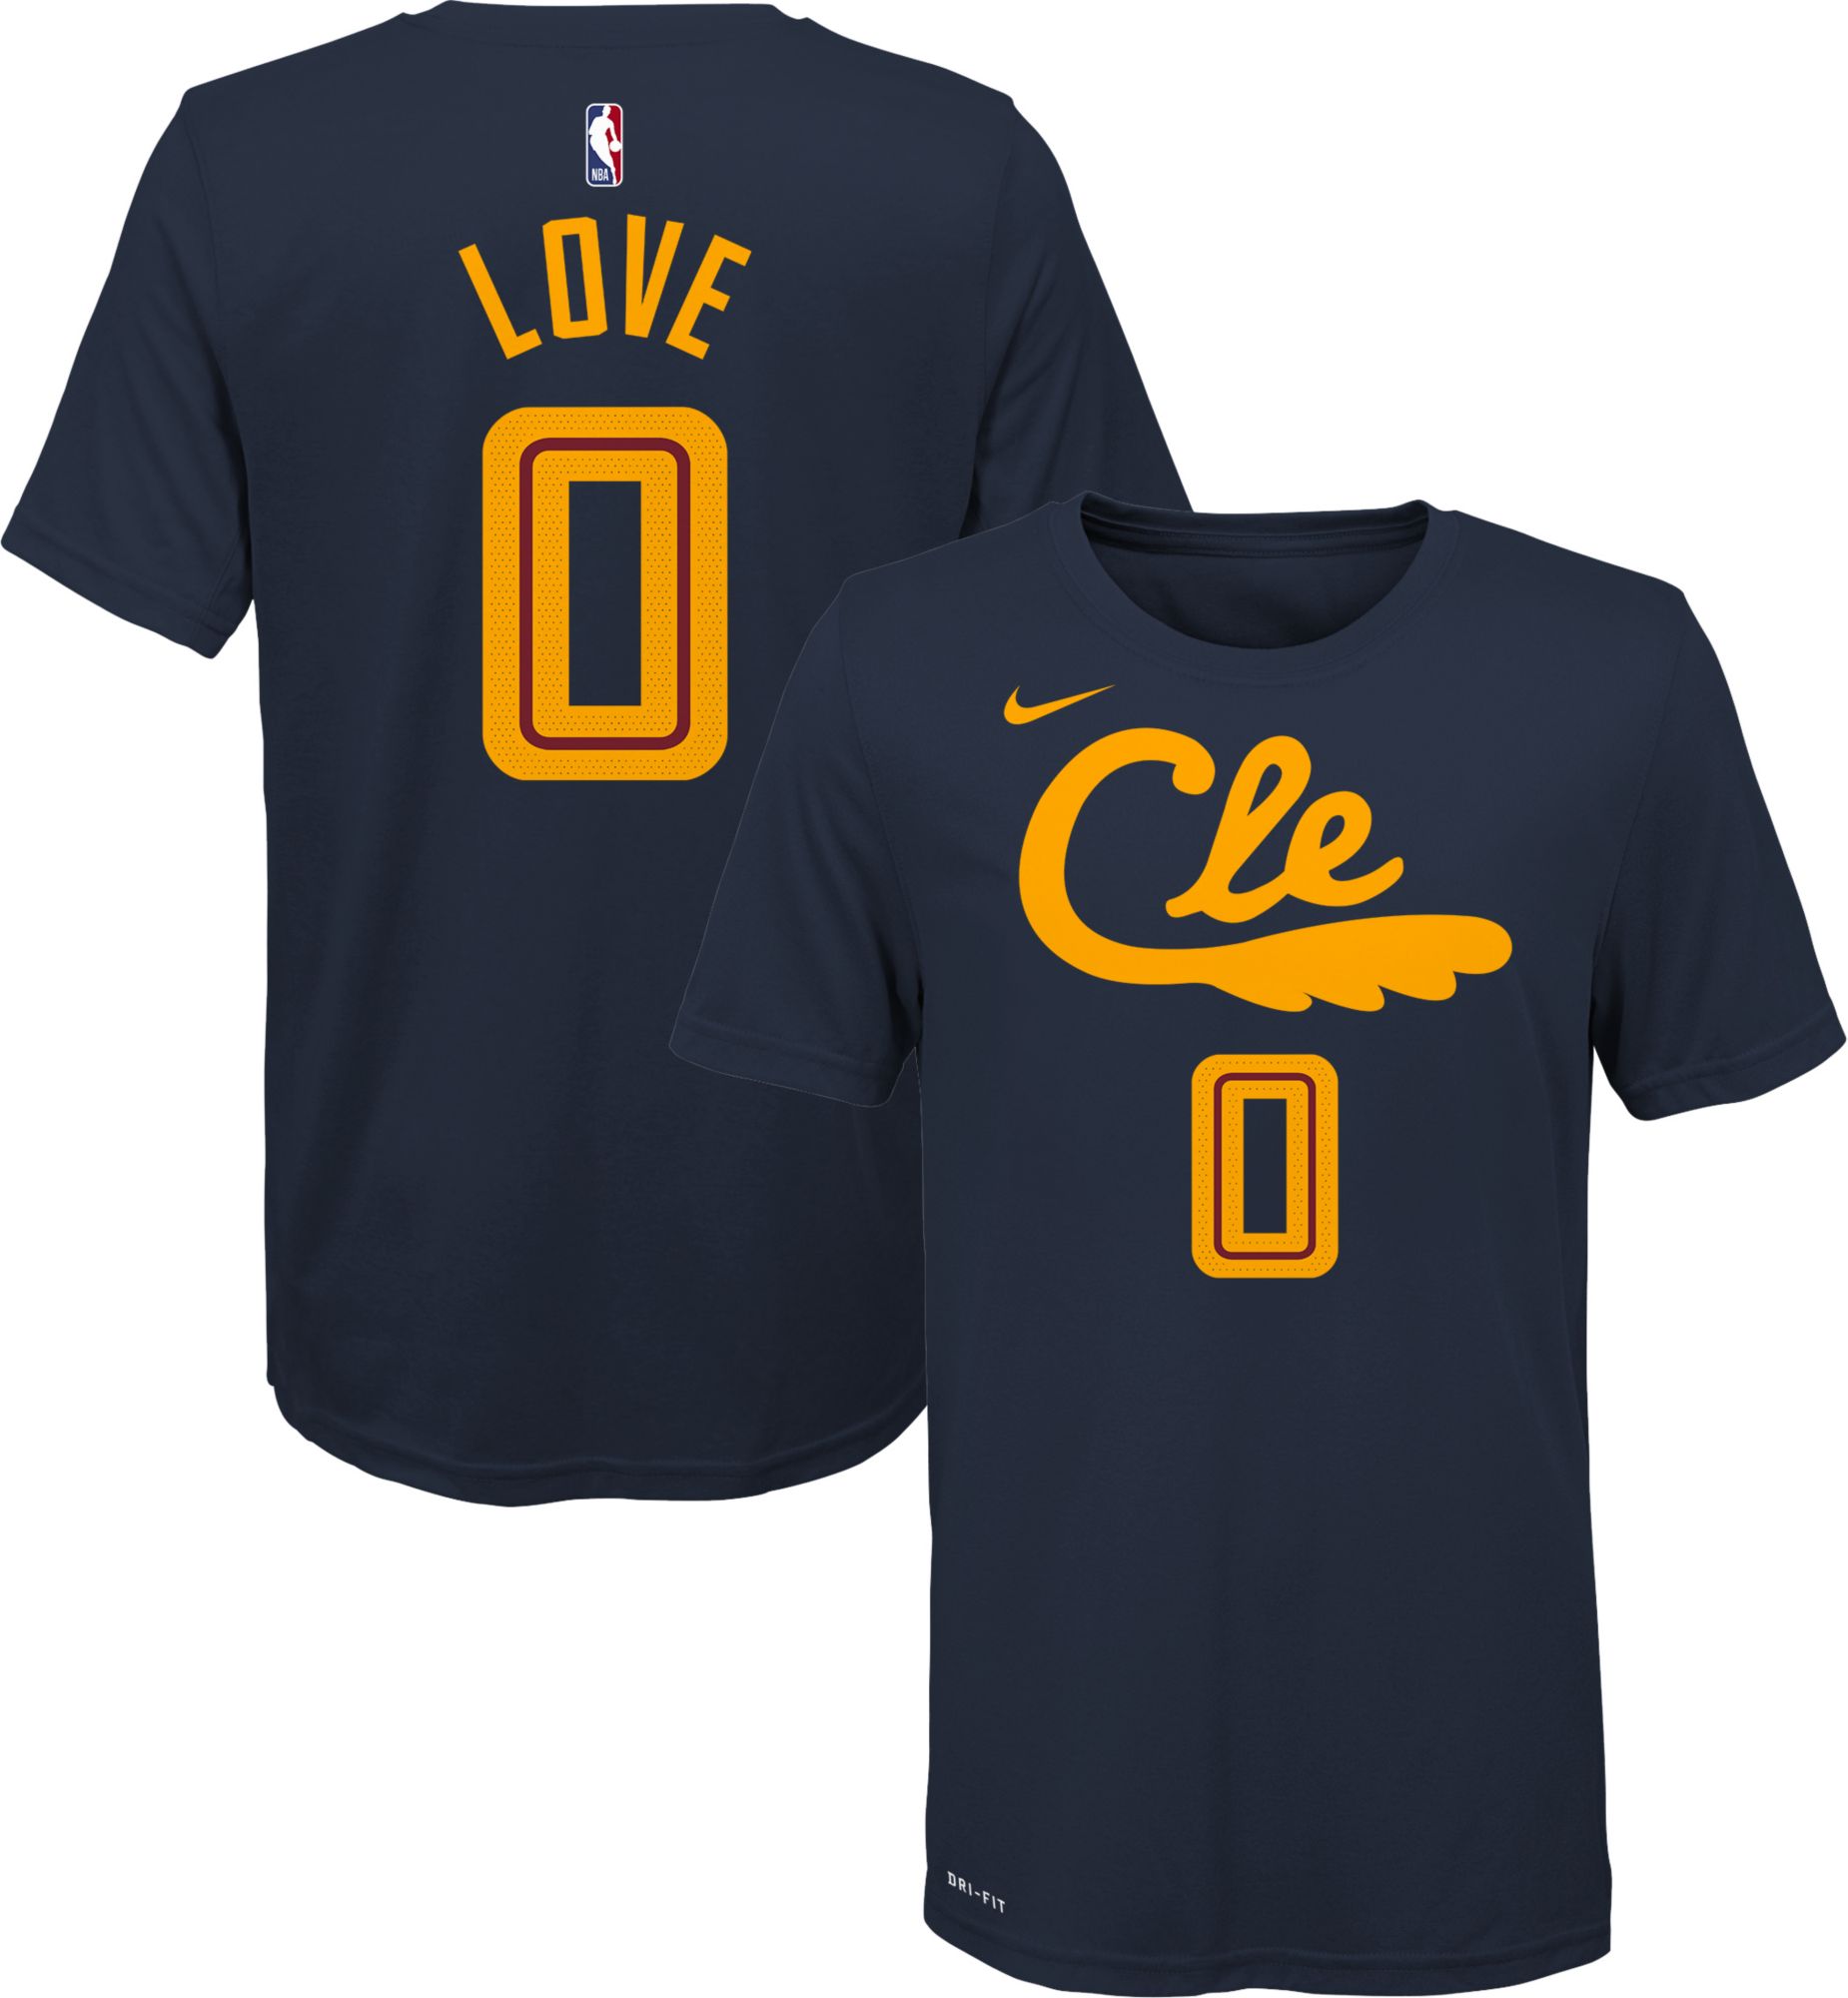 kevin love city edition jersey